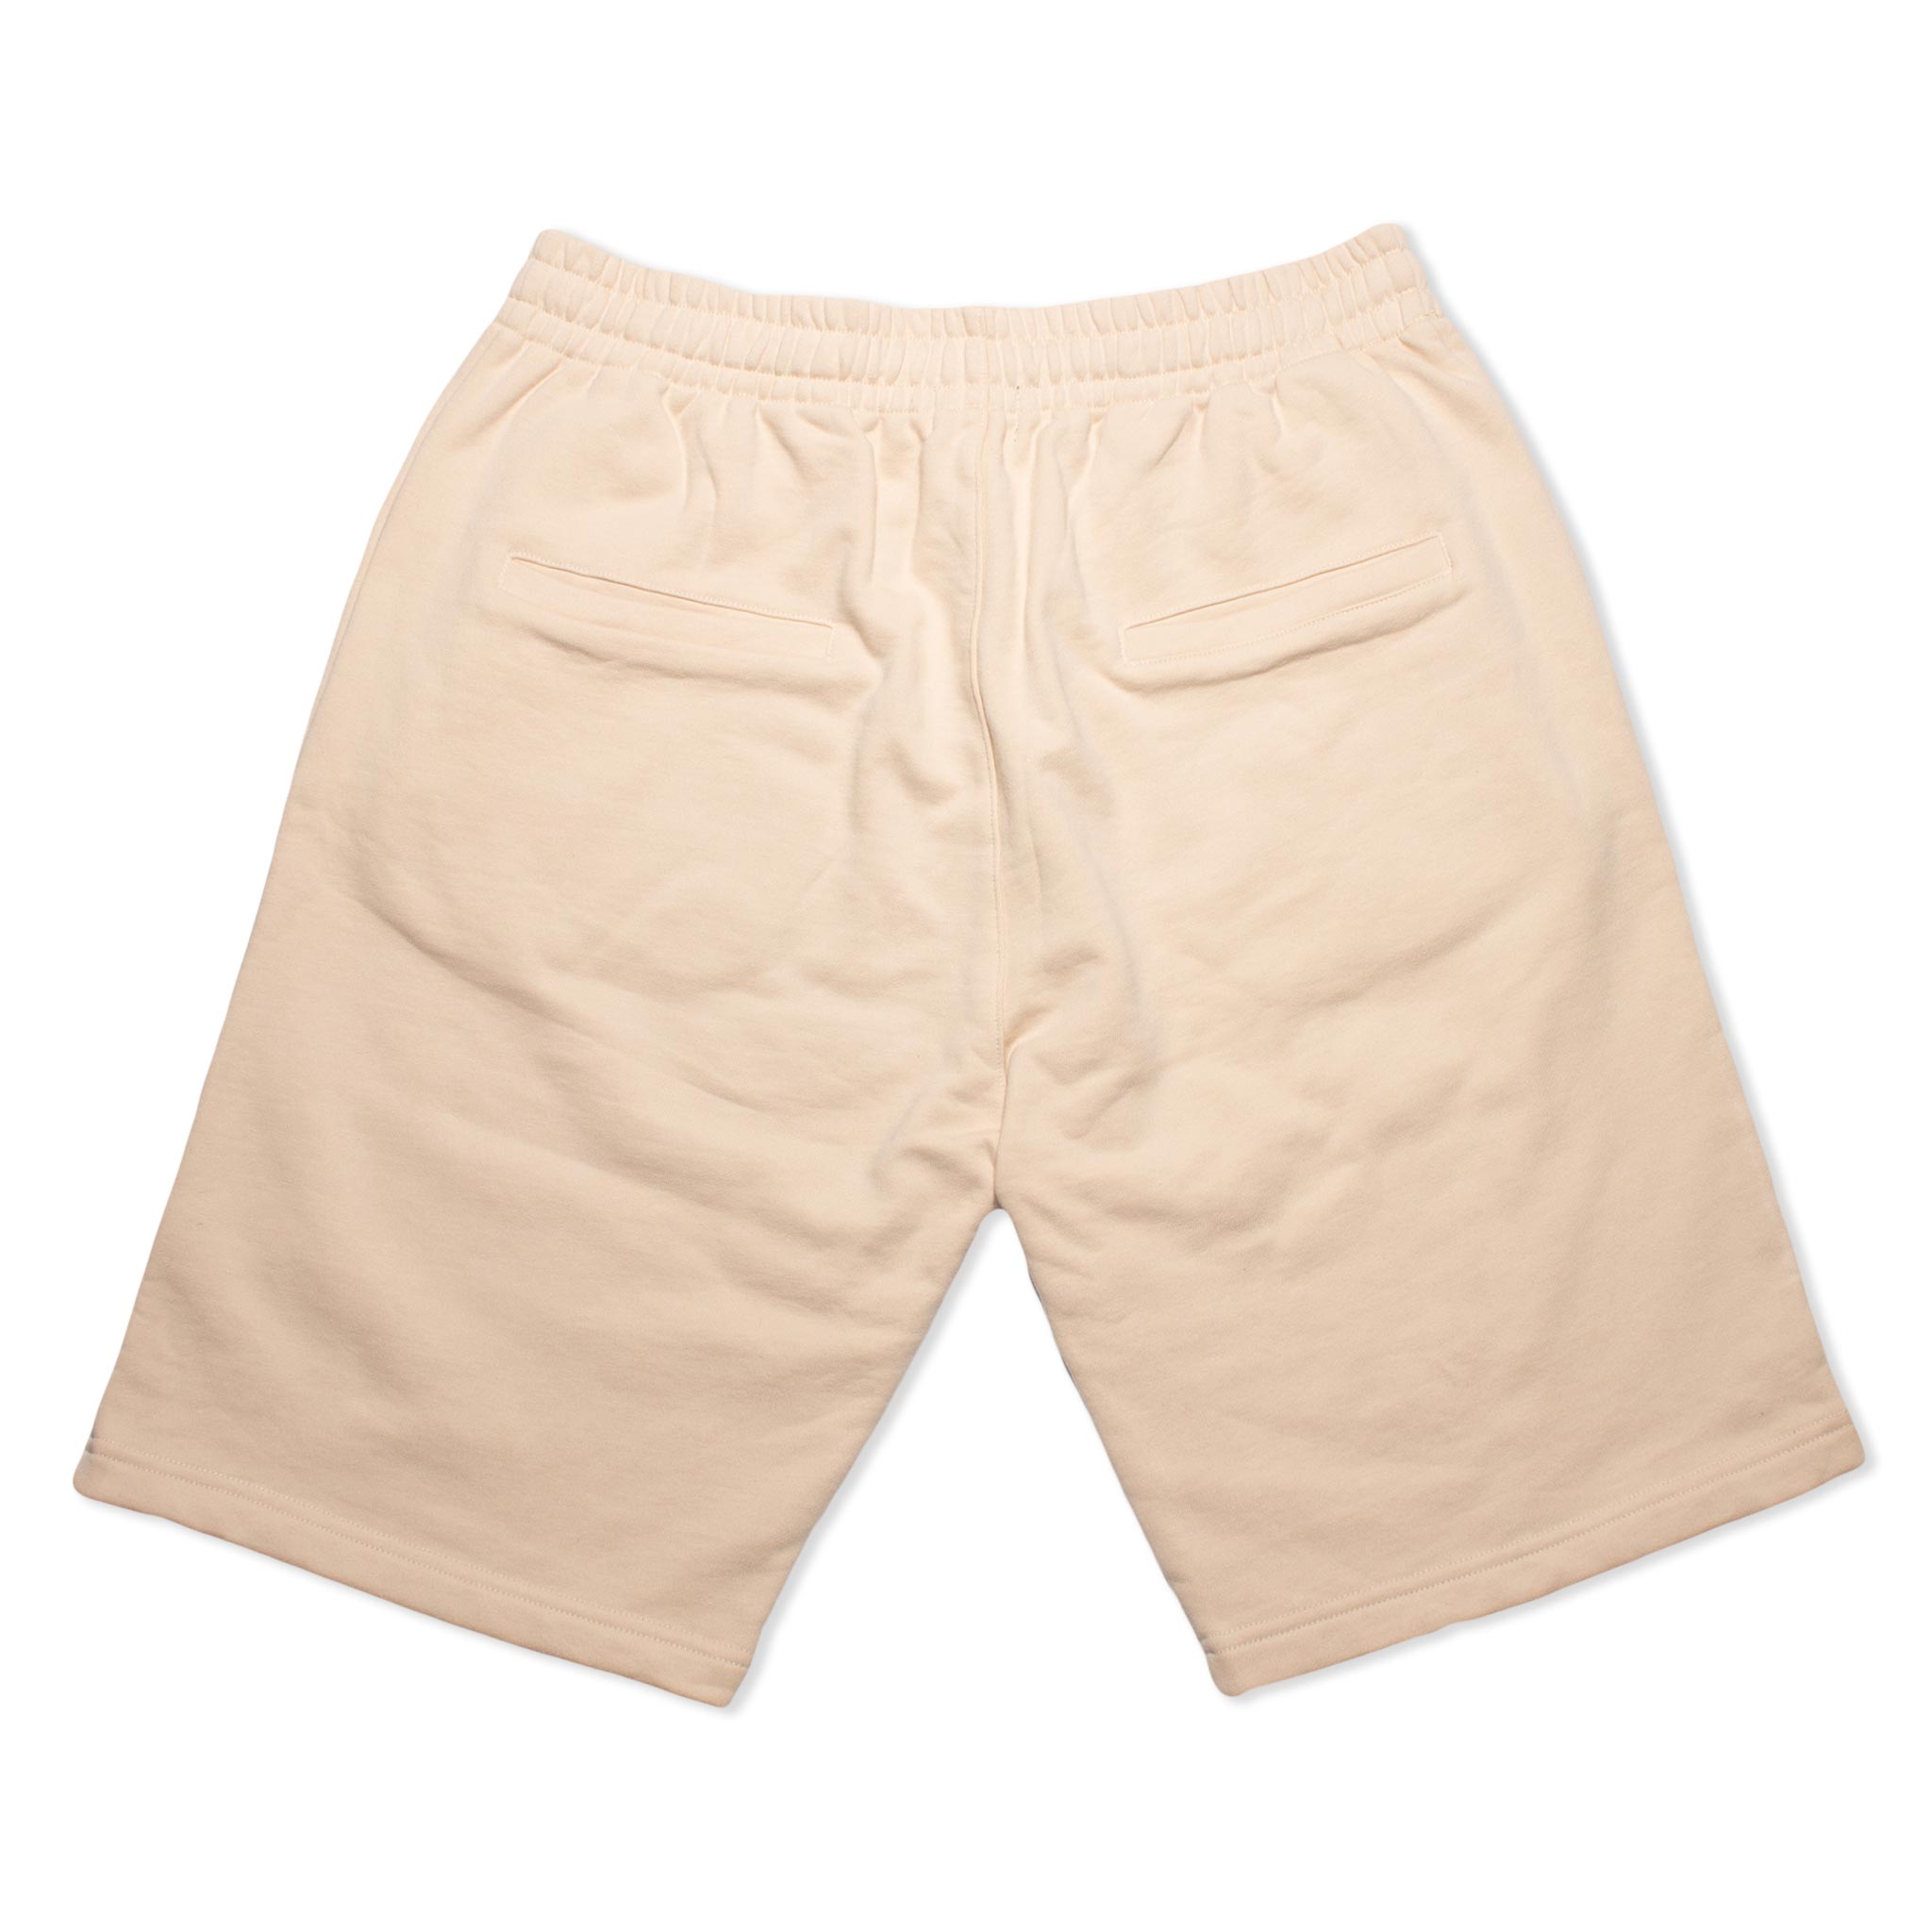 HOMME+ Atelier Embroidery Shorts Light Beige